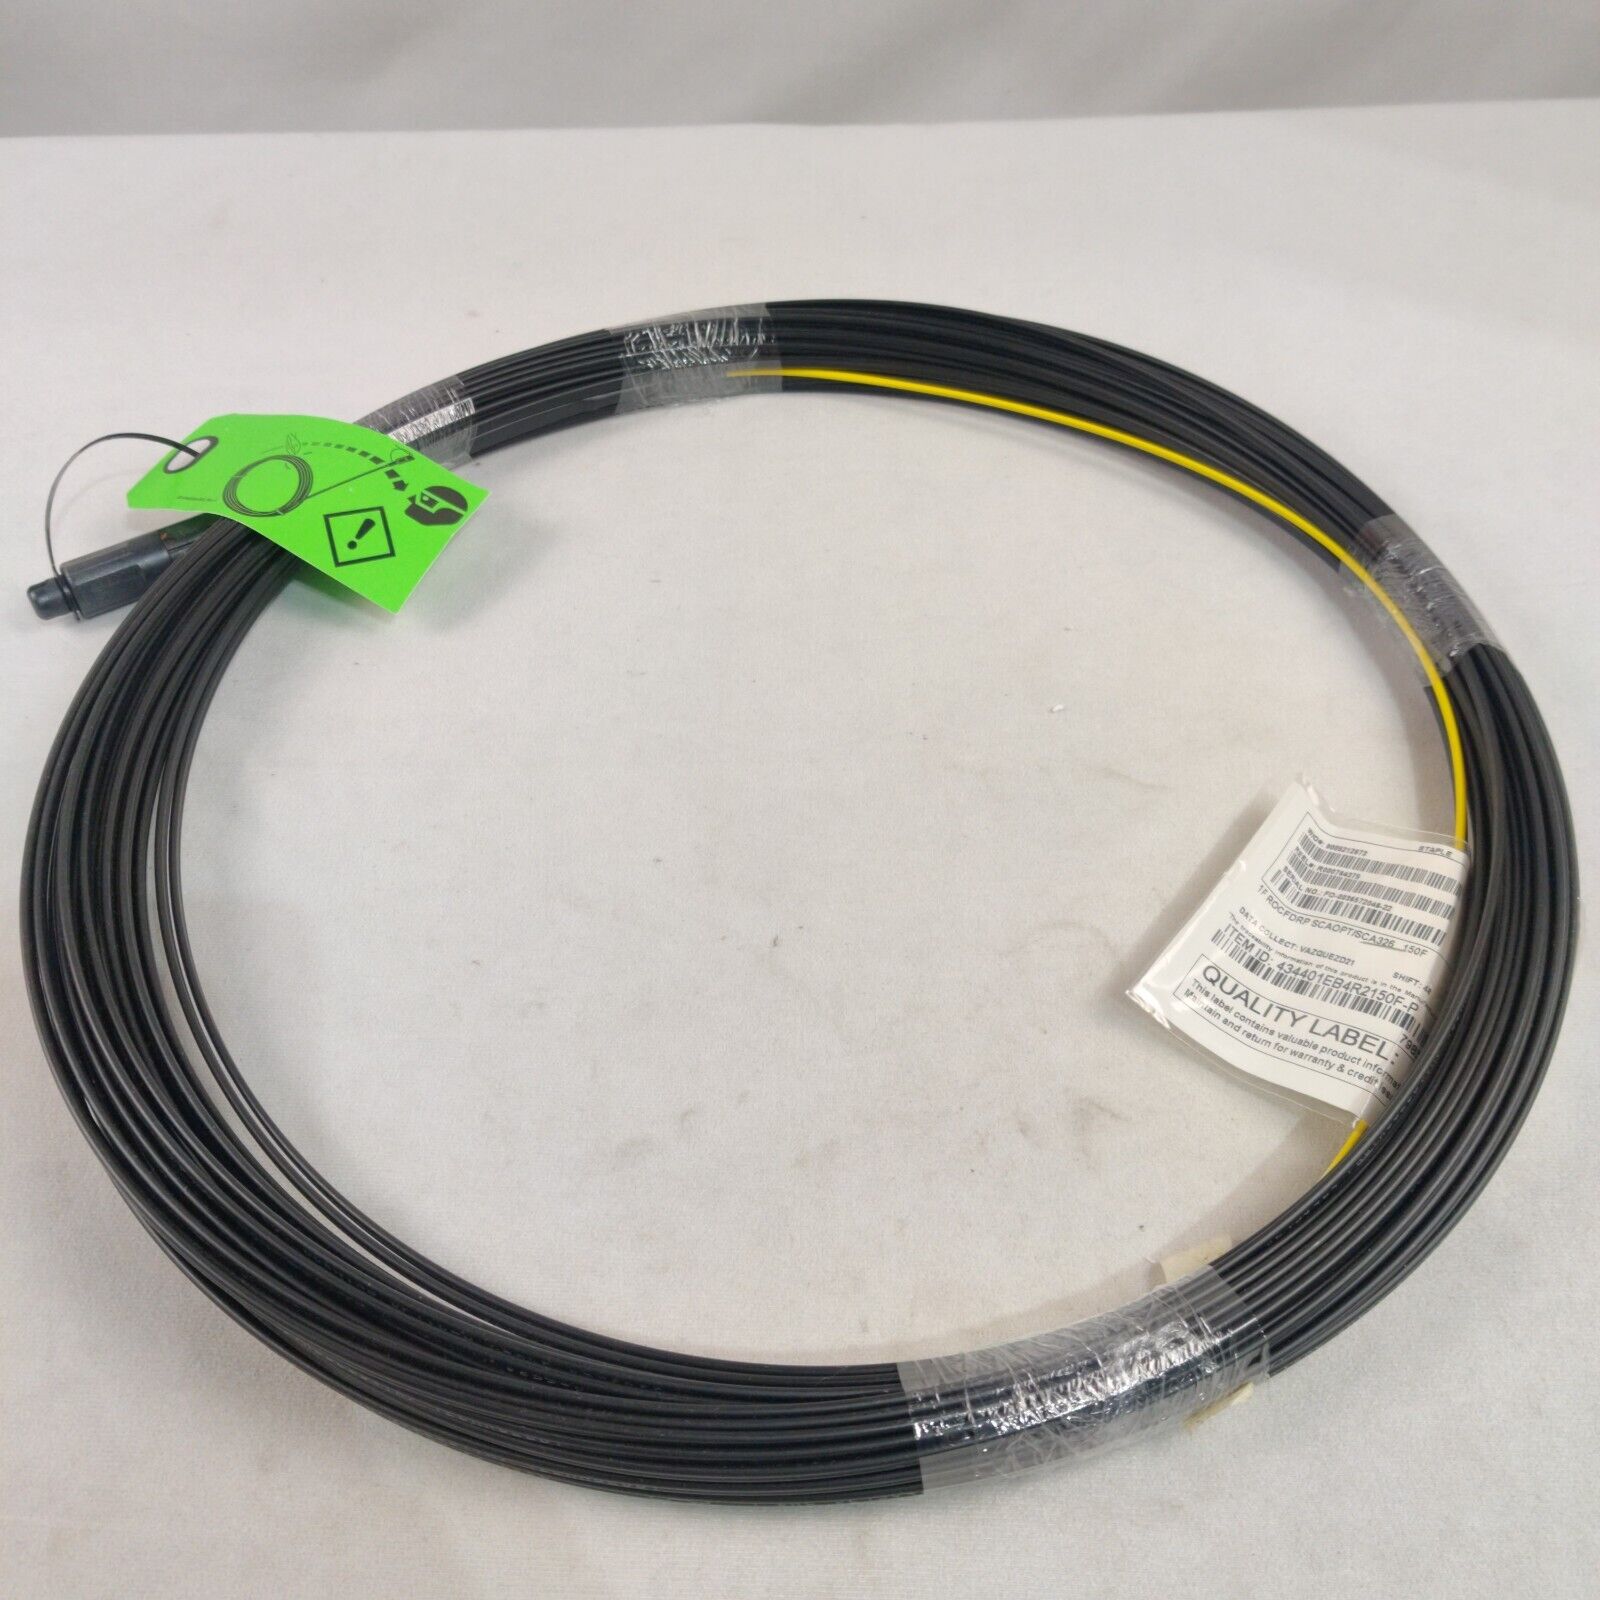 NEW 150ft Patch Corning Fiber Optical Cable 1F ROCFDRP SCAOPT/SCA326 150F